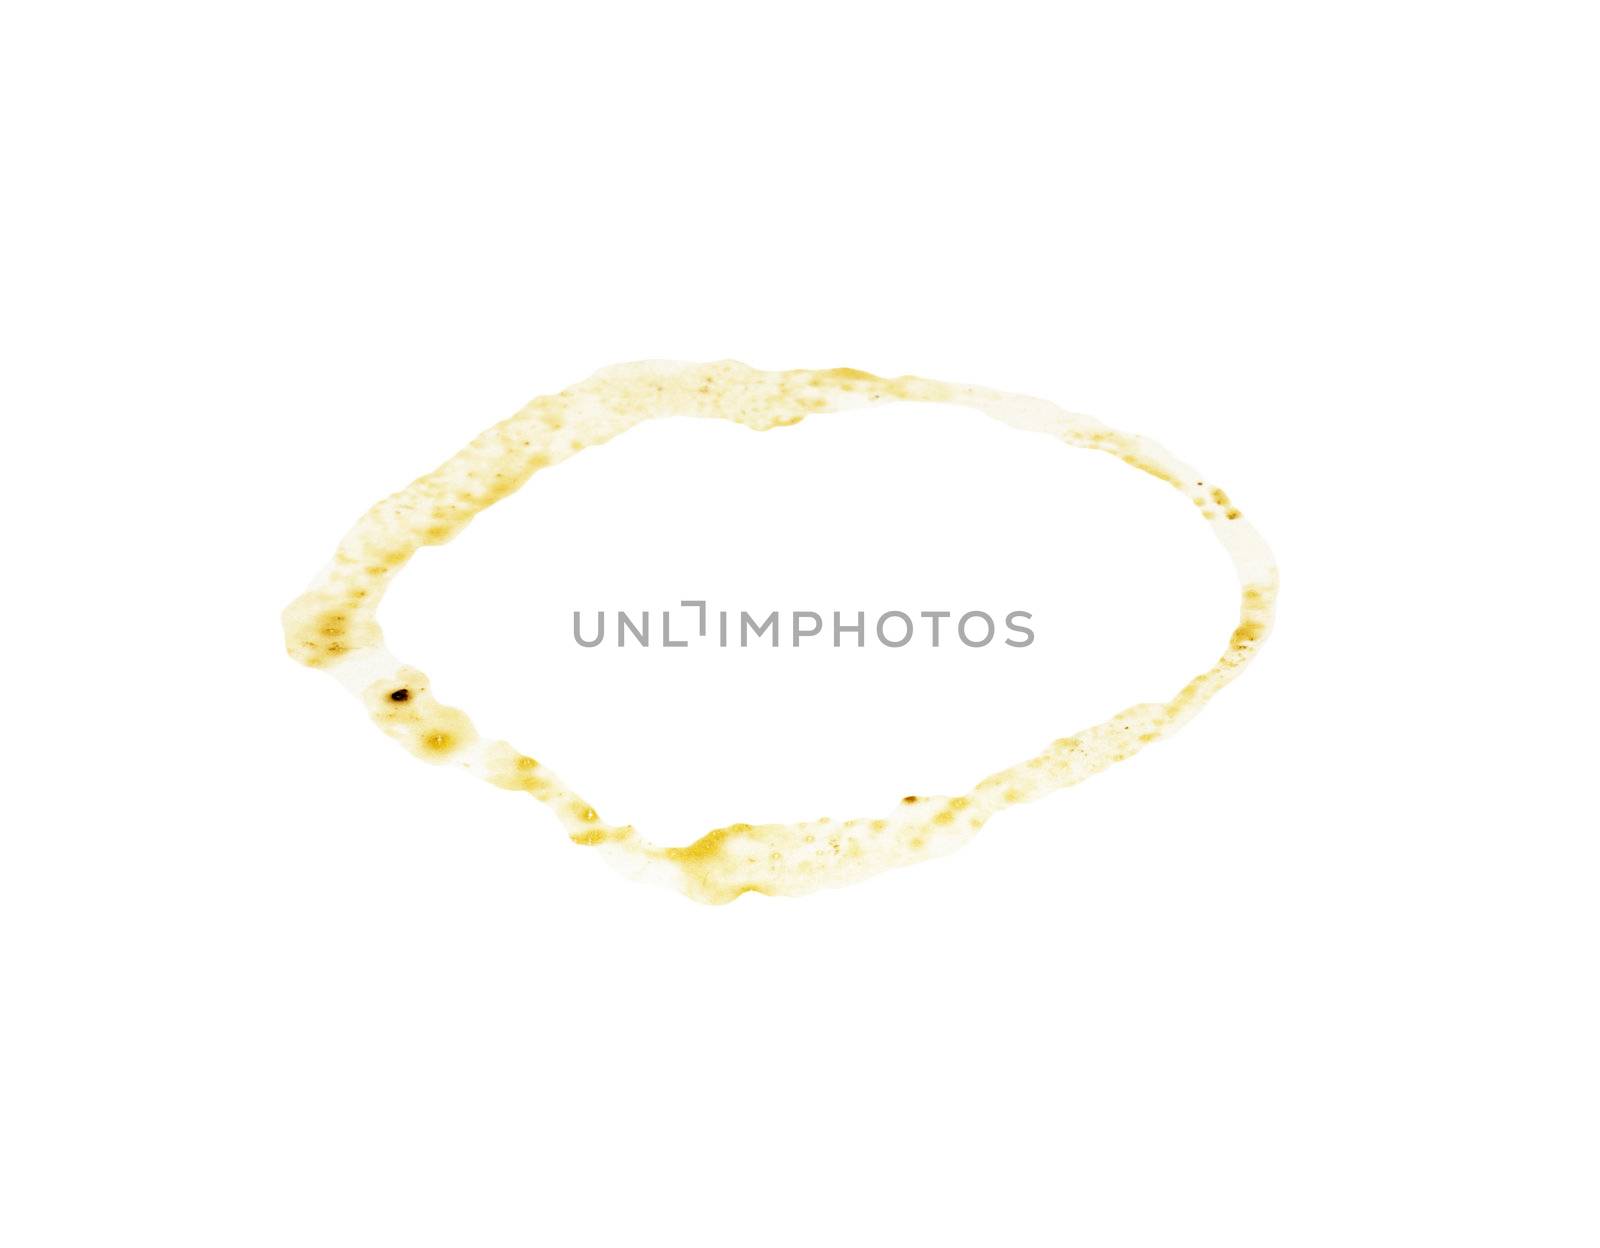 close up of coffee cup marks on white background  by schankz